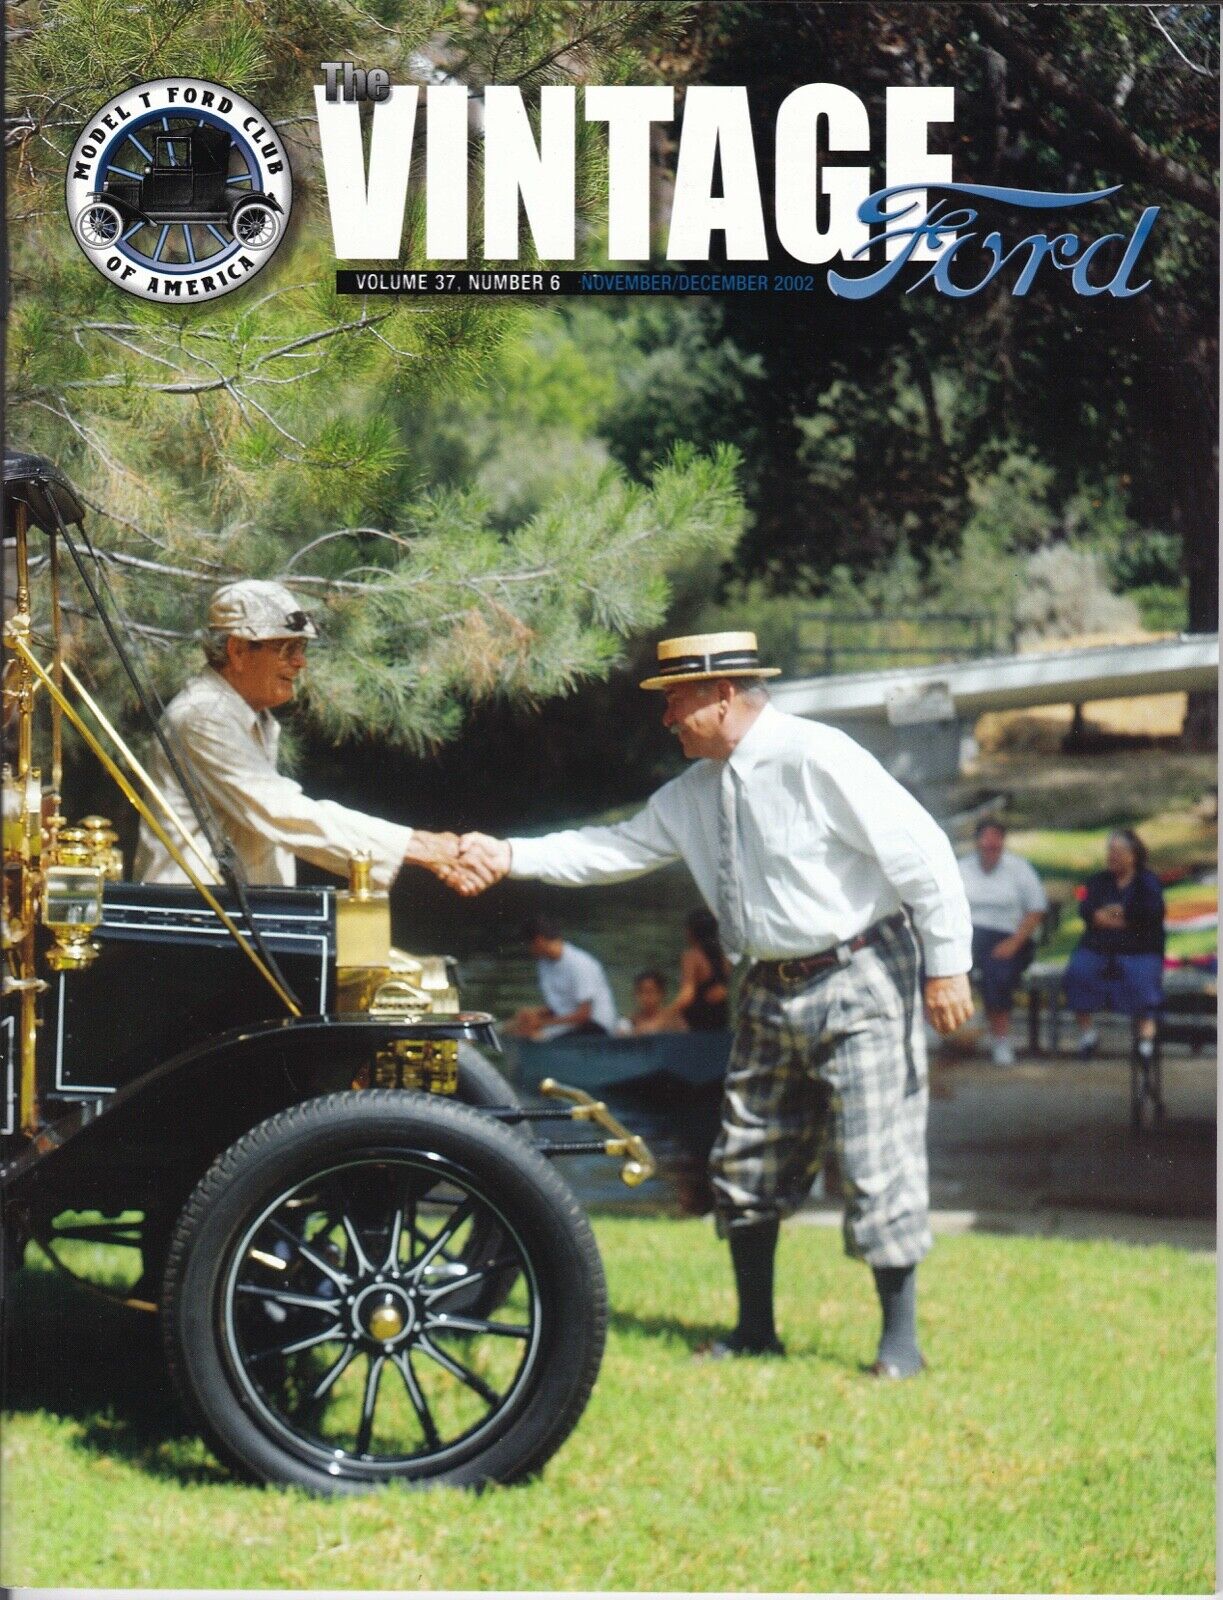 OLD SWIMMIN' HOLE - THE VINTAGE FORD MAGAZINE - SAN FERNANDO VALLEY CHAPTER